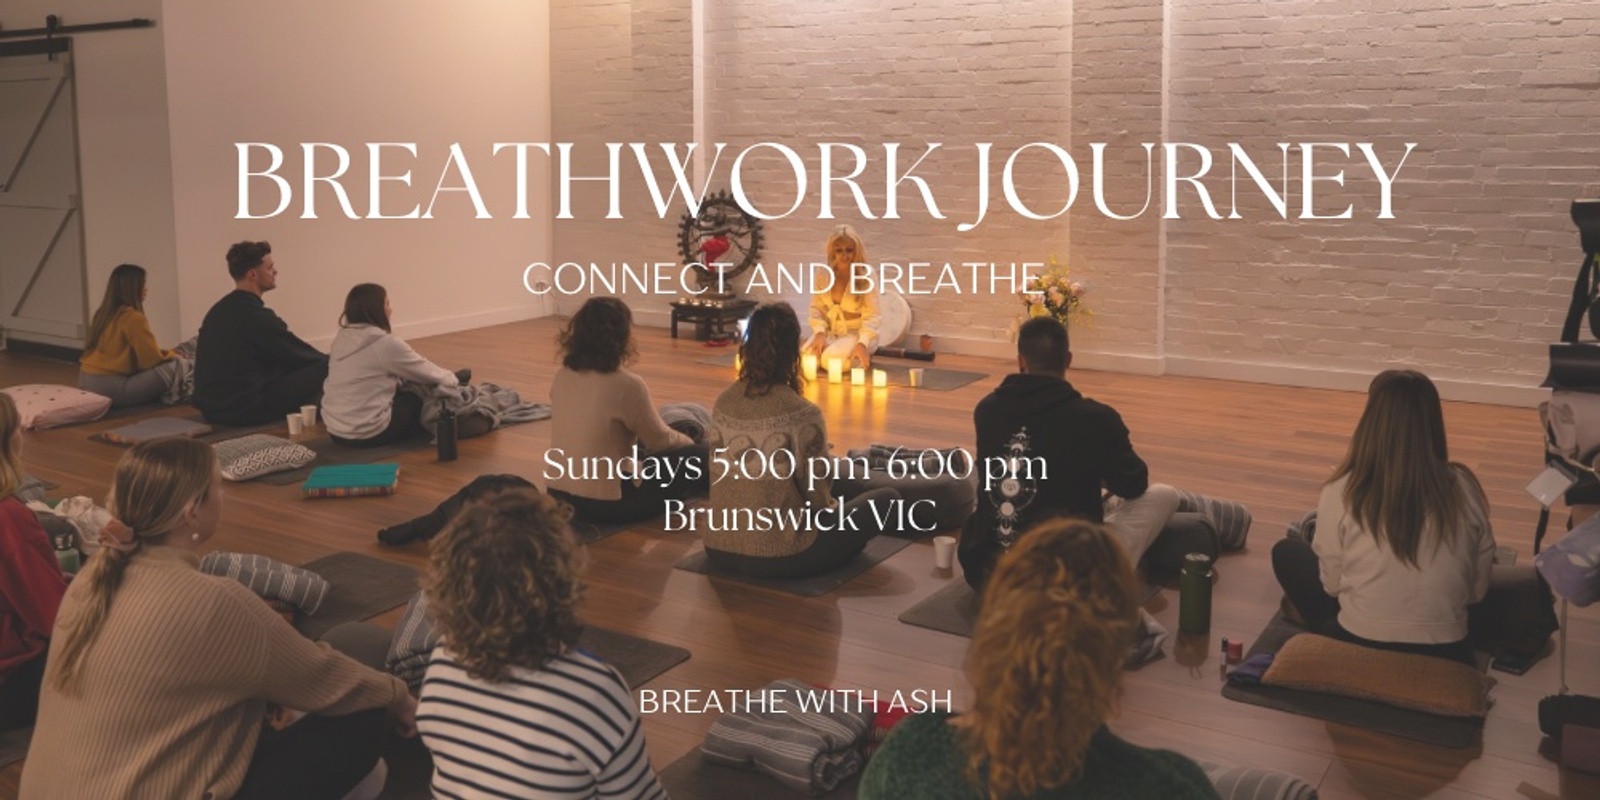 Banner image for Breathwork Journey - Connect and Breathe with Ash